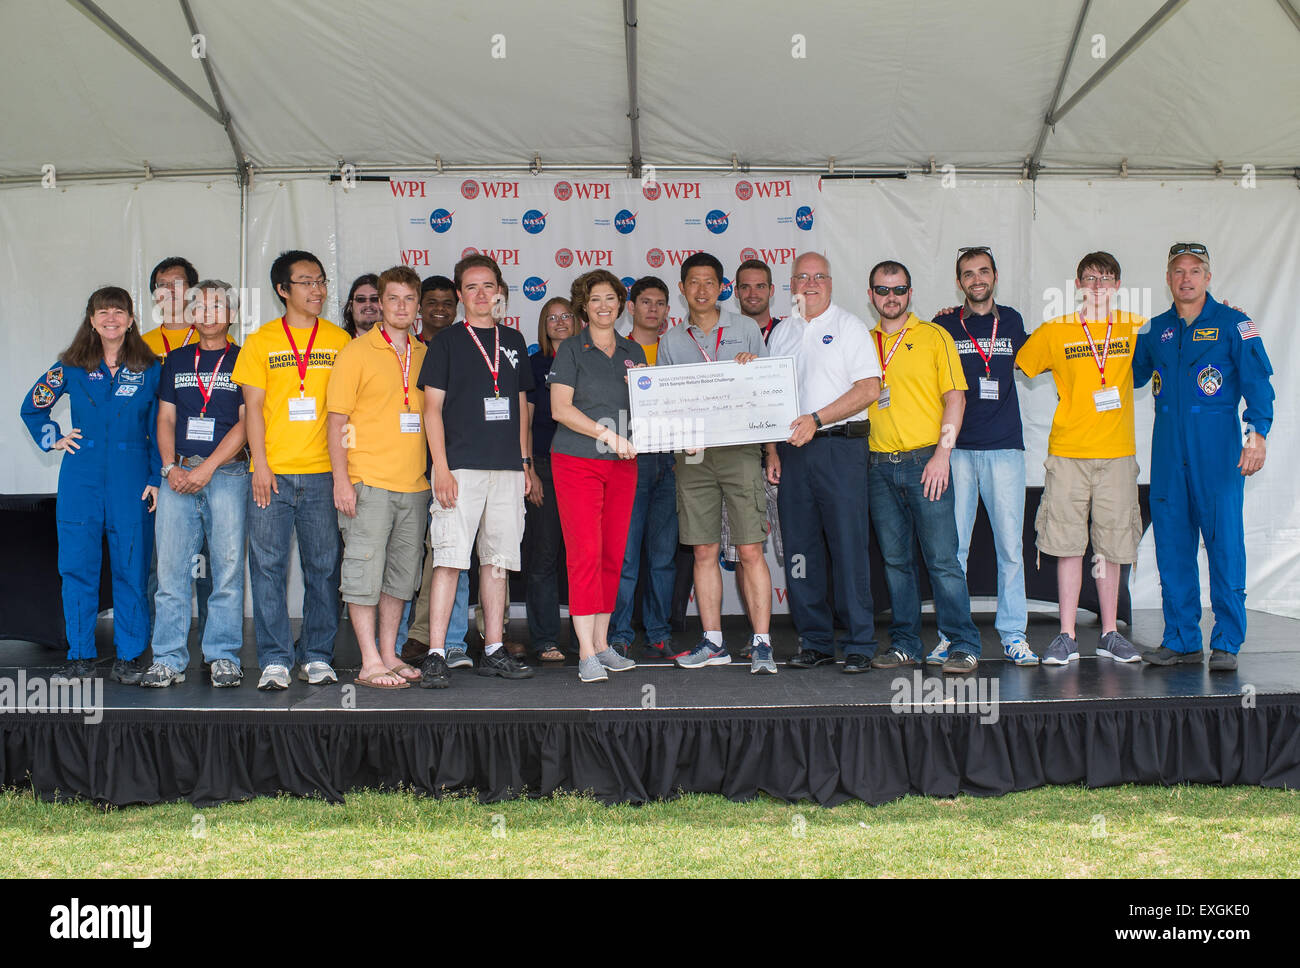 The Mountaineers team from West Virginia University accept a $100,000 prize for completing the level two challenge at the 2015 Sample Return Robot Challenge from Dennis Andrucyk, deputy associate administrator for the Space Technology Mission Directorate at NASA Headquarters, Saturday, June 13, 2015, at Worcester Polytechnic Institute (WPI) in Worcester, Mass.  Members of the Mountaineers team are Yu Gu, Jared Strader, Scott Harper, Nicholas Ohi, Kyle Lassak, Alexander Hypes, Boyi Hu, Matthew Gramlich, Lisa Kogan, Edmundo Salgado Martinez, Marvin Cheng, Tanmay Mandal, Rahul Kavi, Stéphane D'Ur Stock Photo